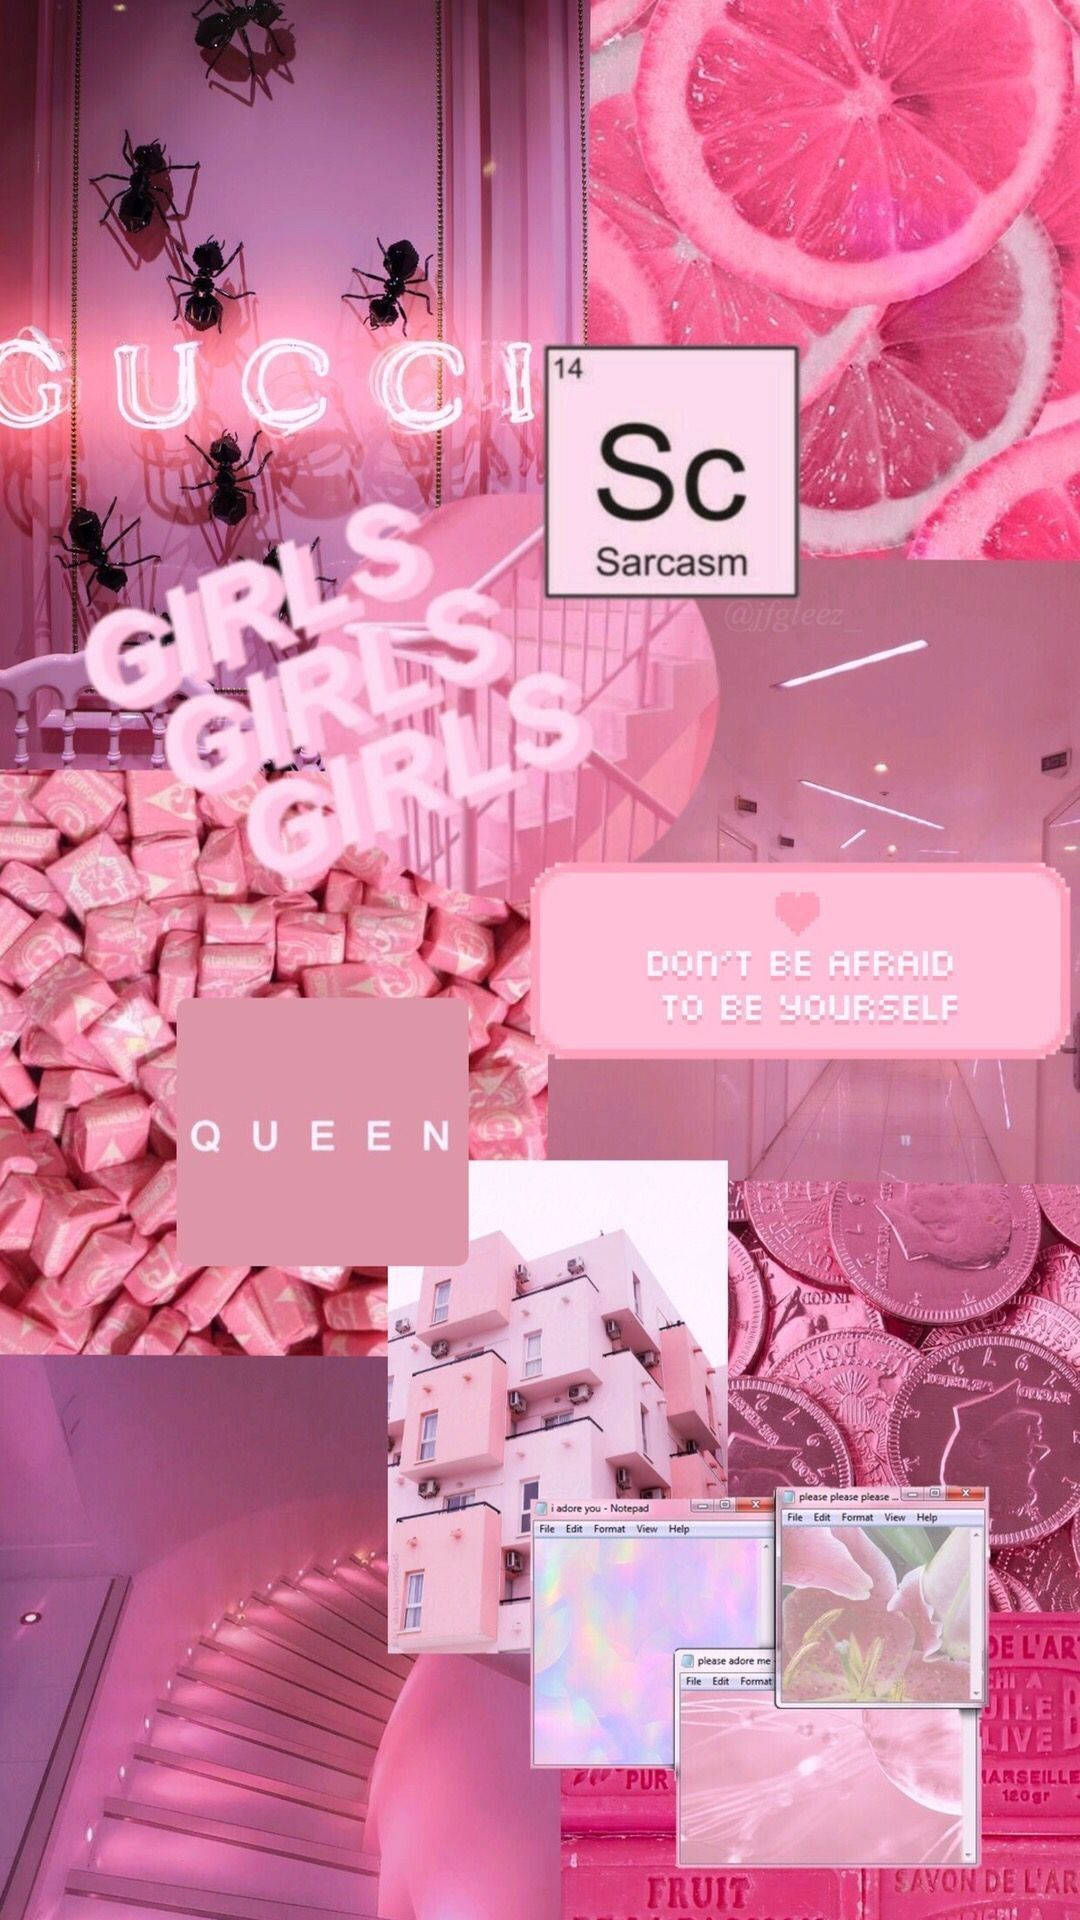 Pink aesthetic background with a collage of pink images - Pink, pink collage, baddie, money, Gucci, Virgo